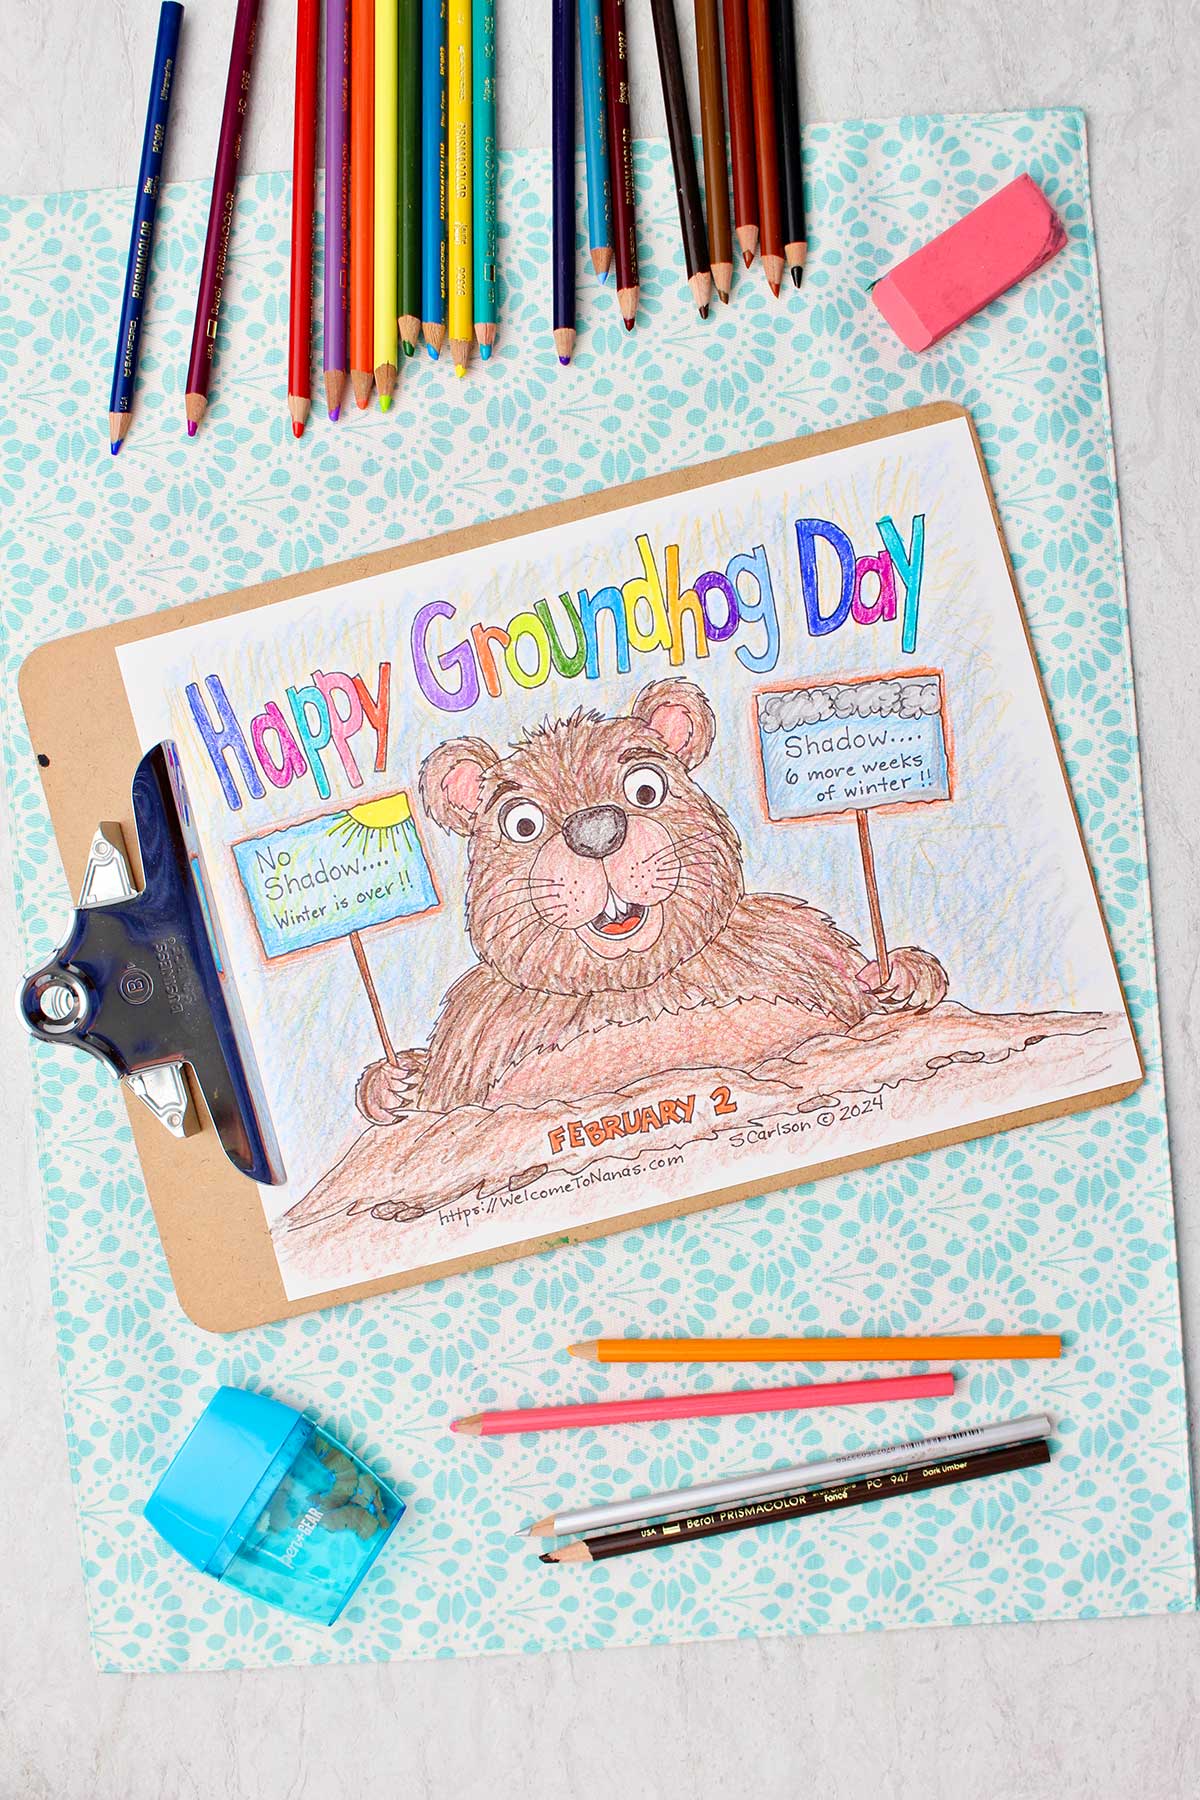 Completed Groundhog Day Coloring Page with colored pencils and pencil sharpener near by.